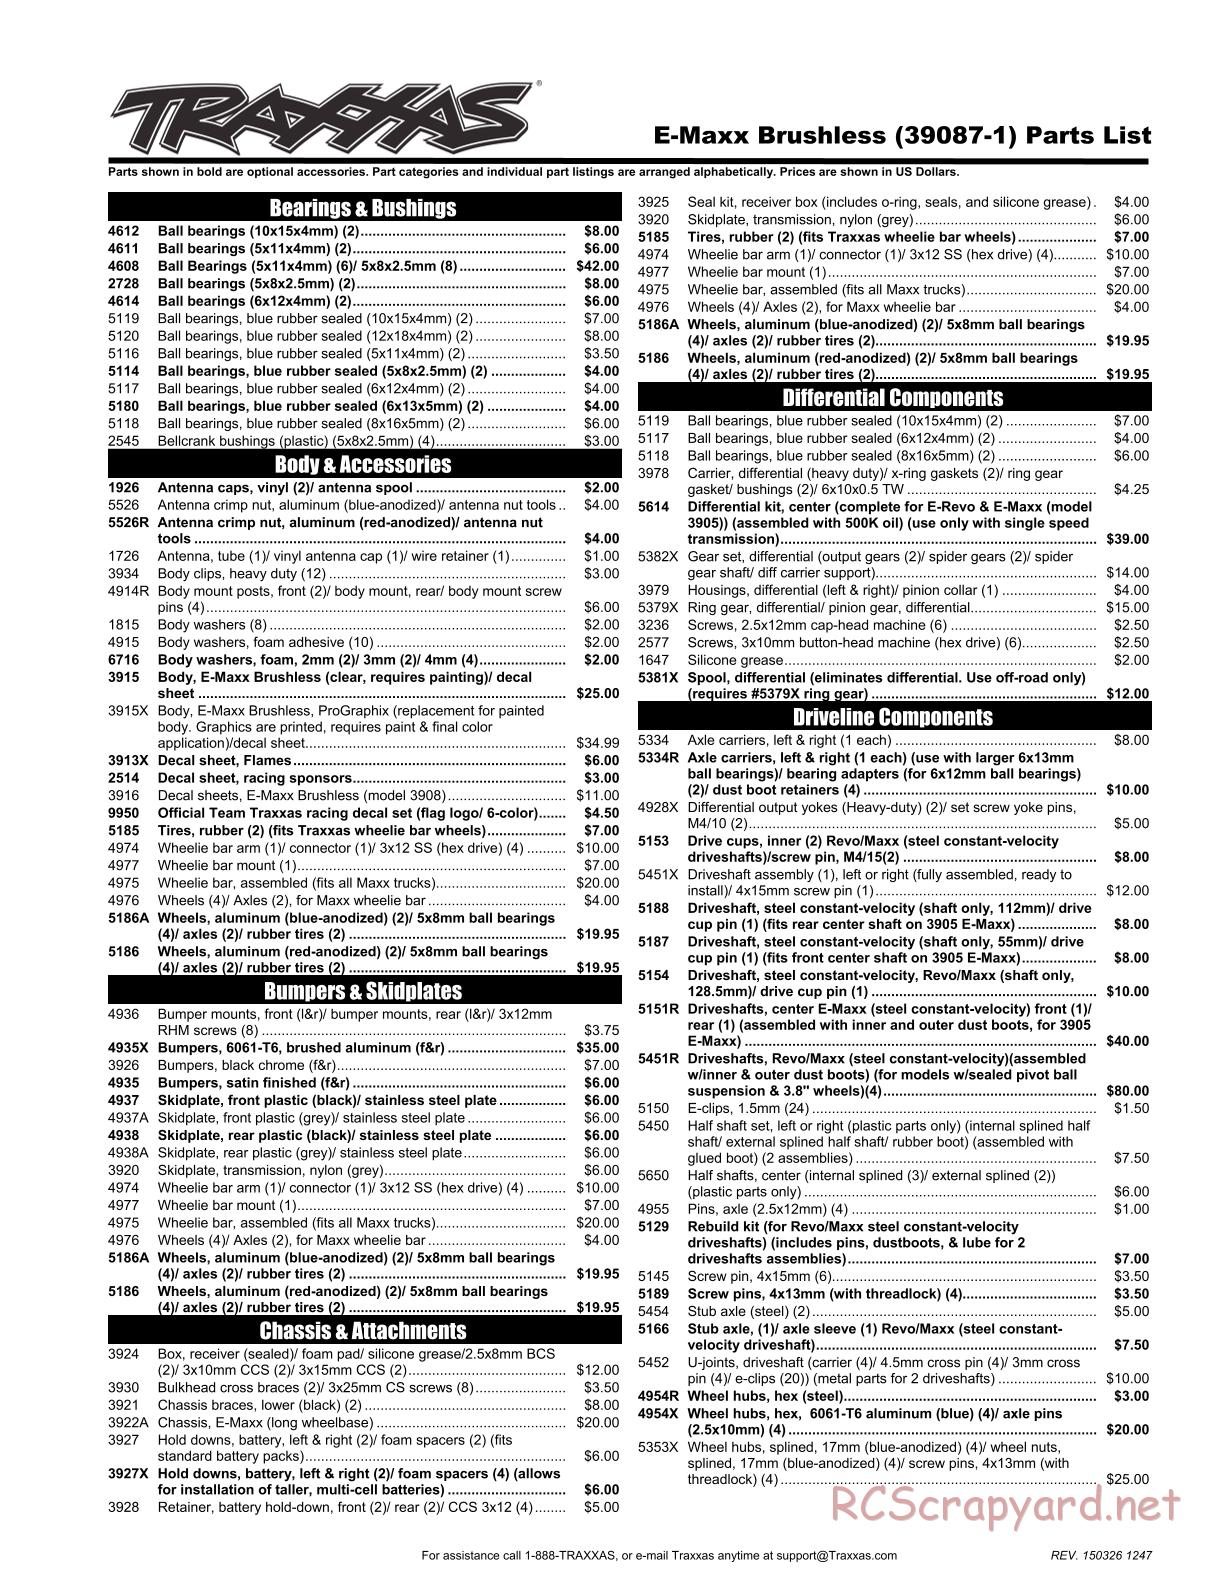 Traxxas - E-Maxx Brushless (2015) - Parts List - Page 1